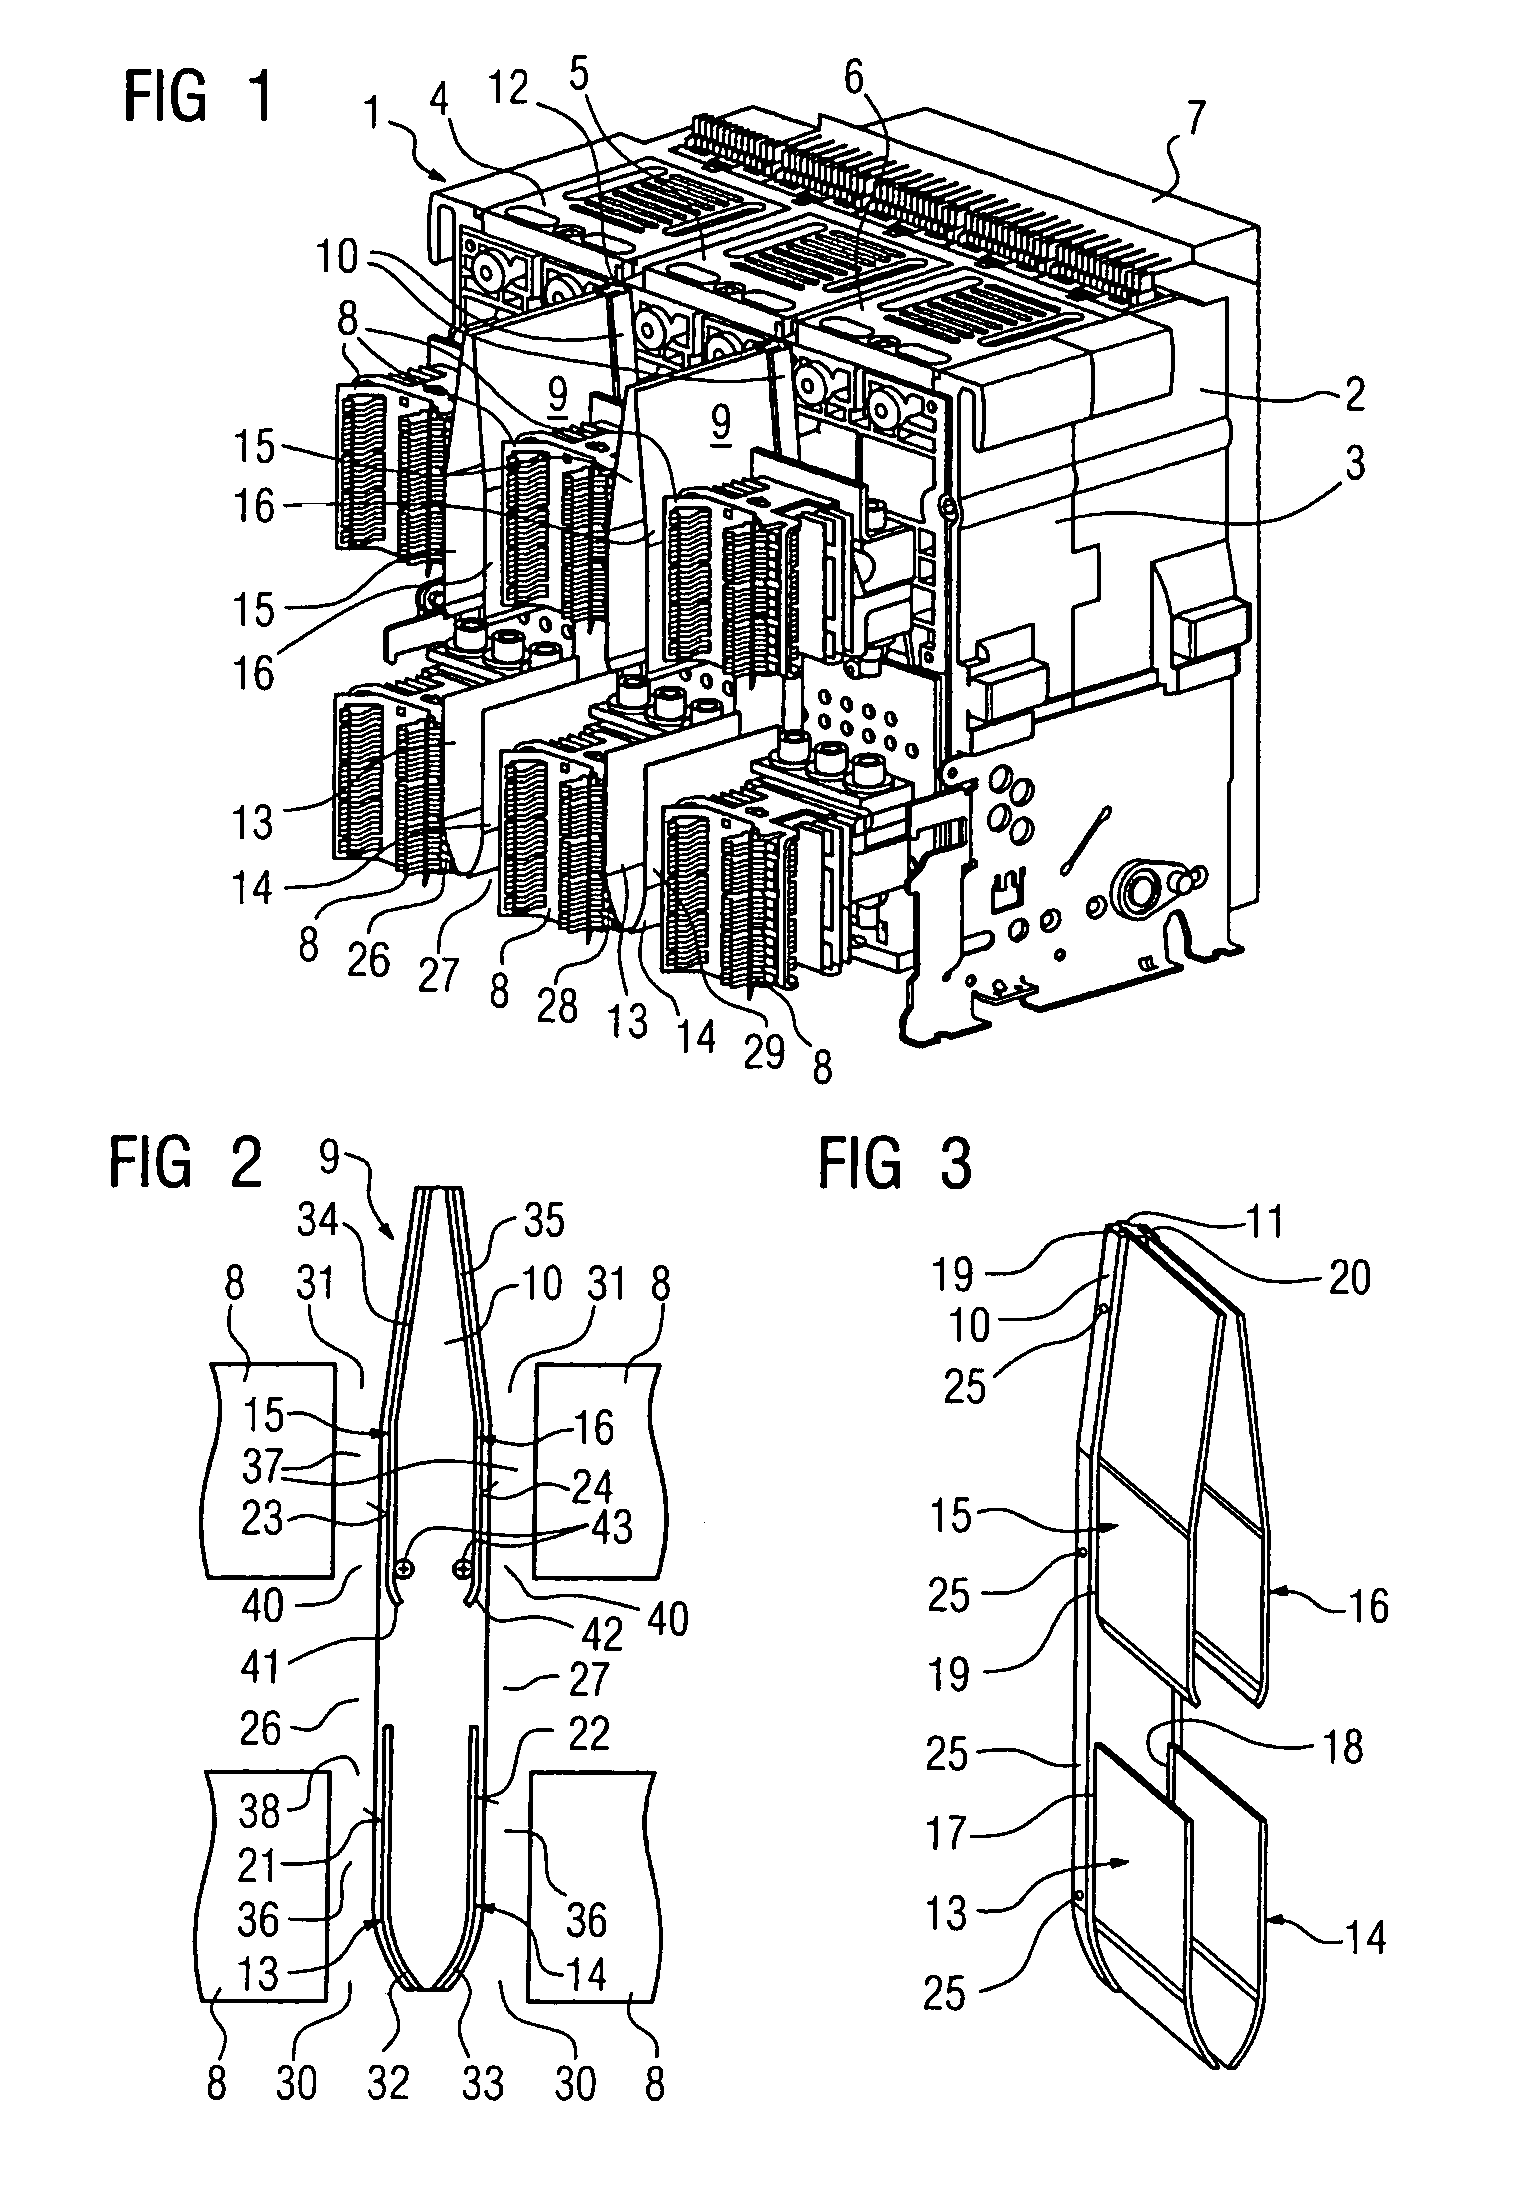 Air guidance device for cooling a switch part of an electrical switch